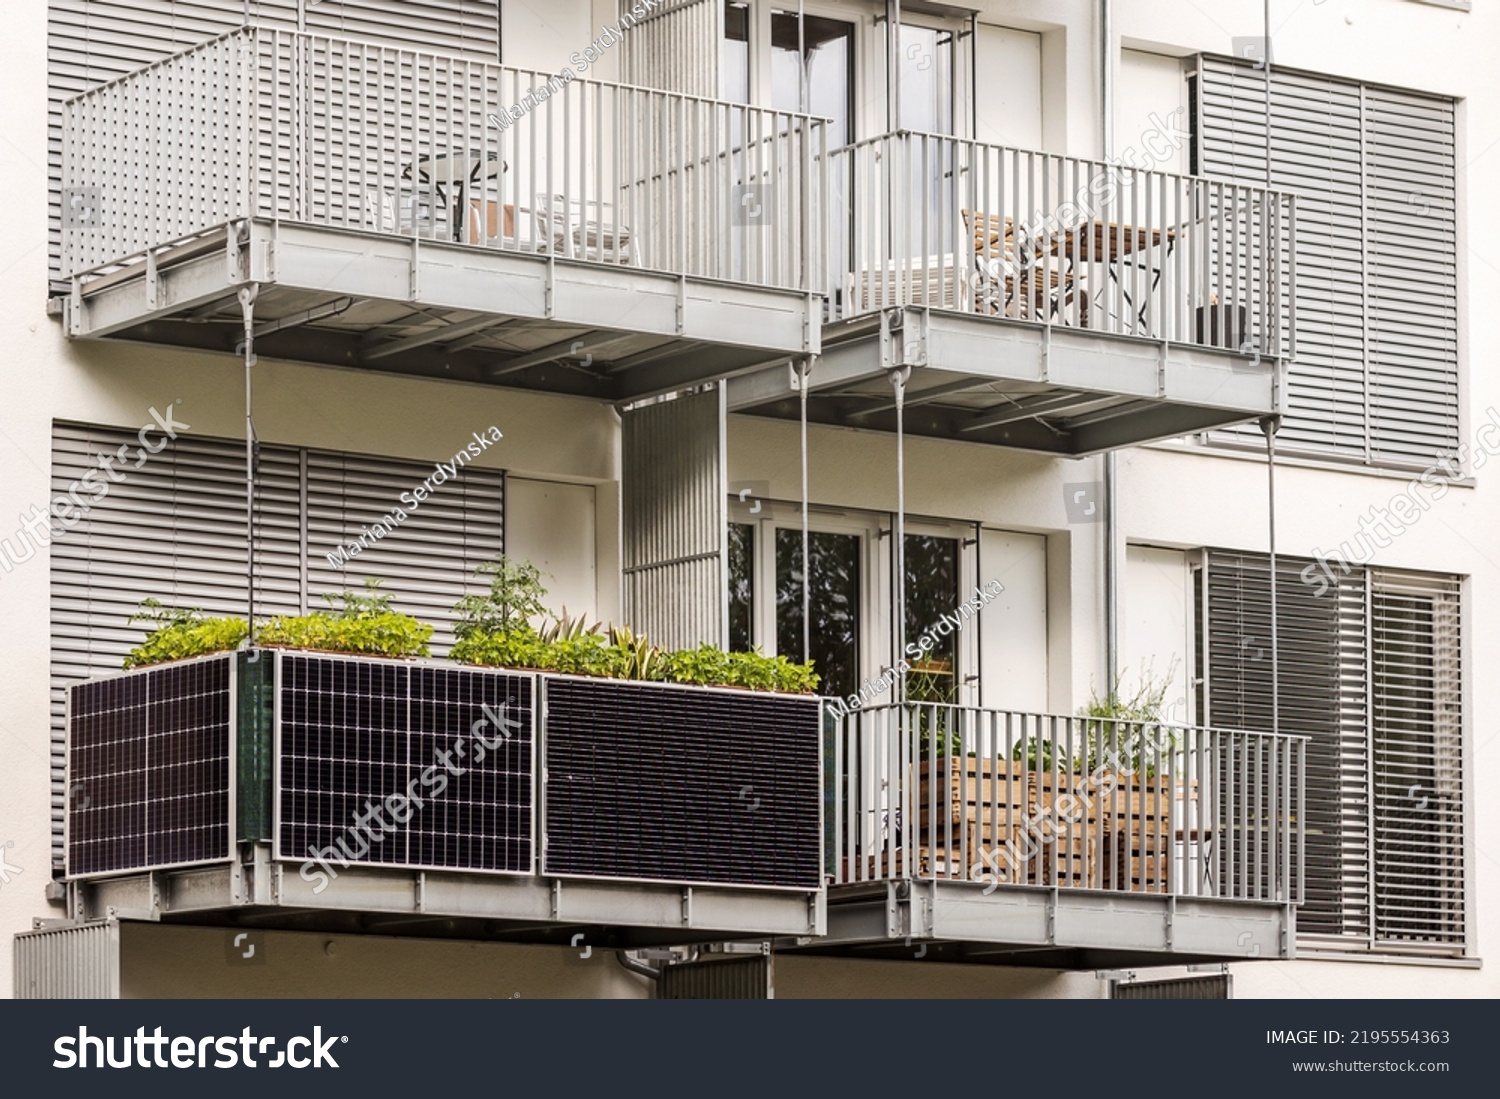 Solar panels on Balcony of  Apartment Building in City. Modern Balcony with Solar Panel. #2195554363